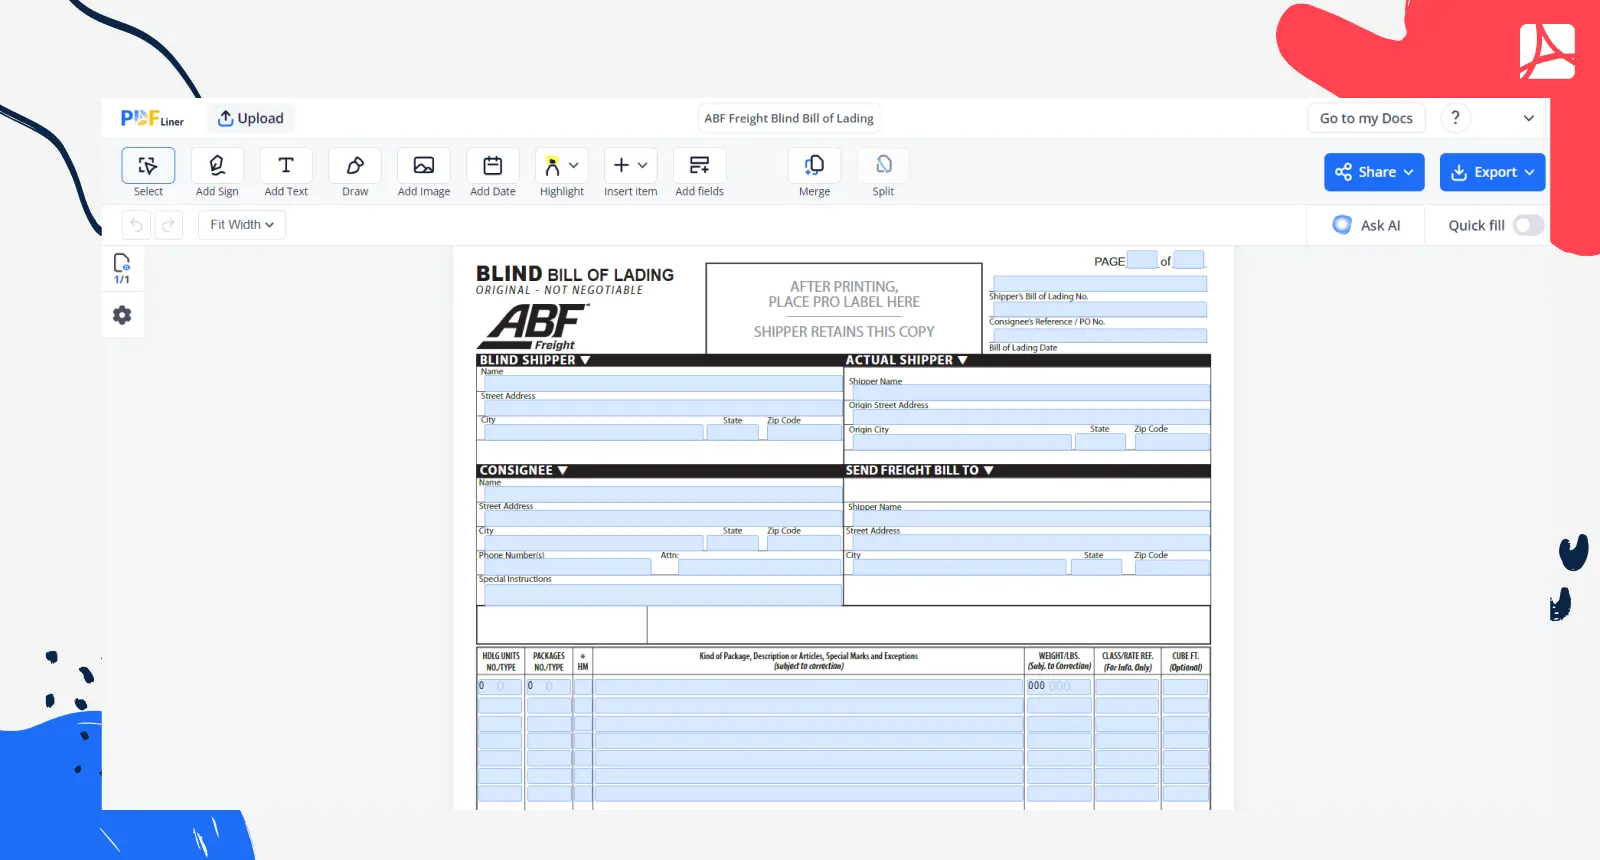 ABF Freight Blind Bill of Lading Screenshot